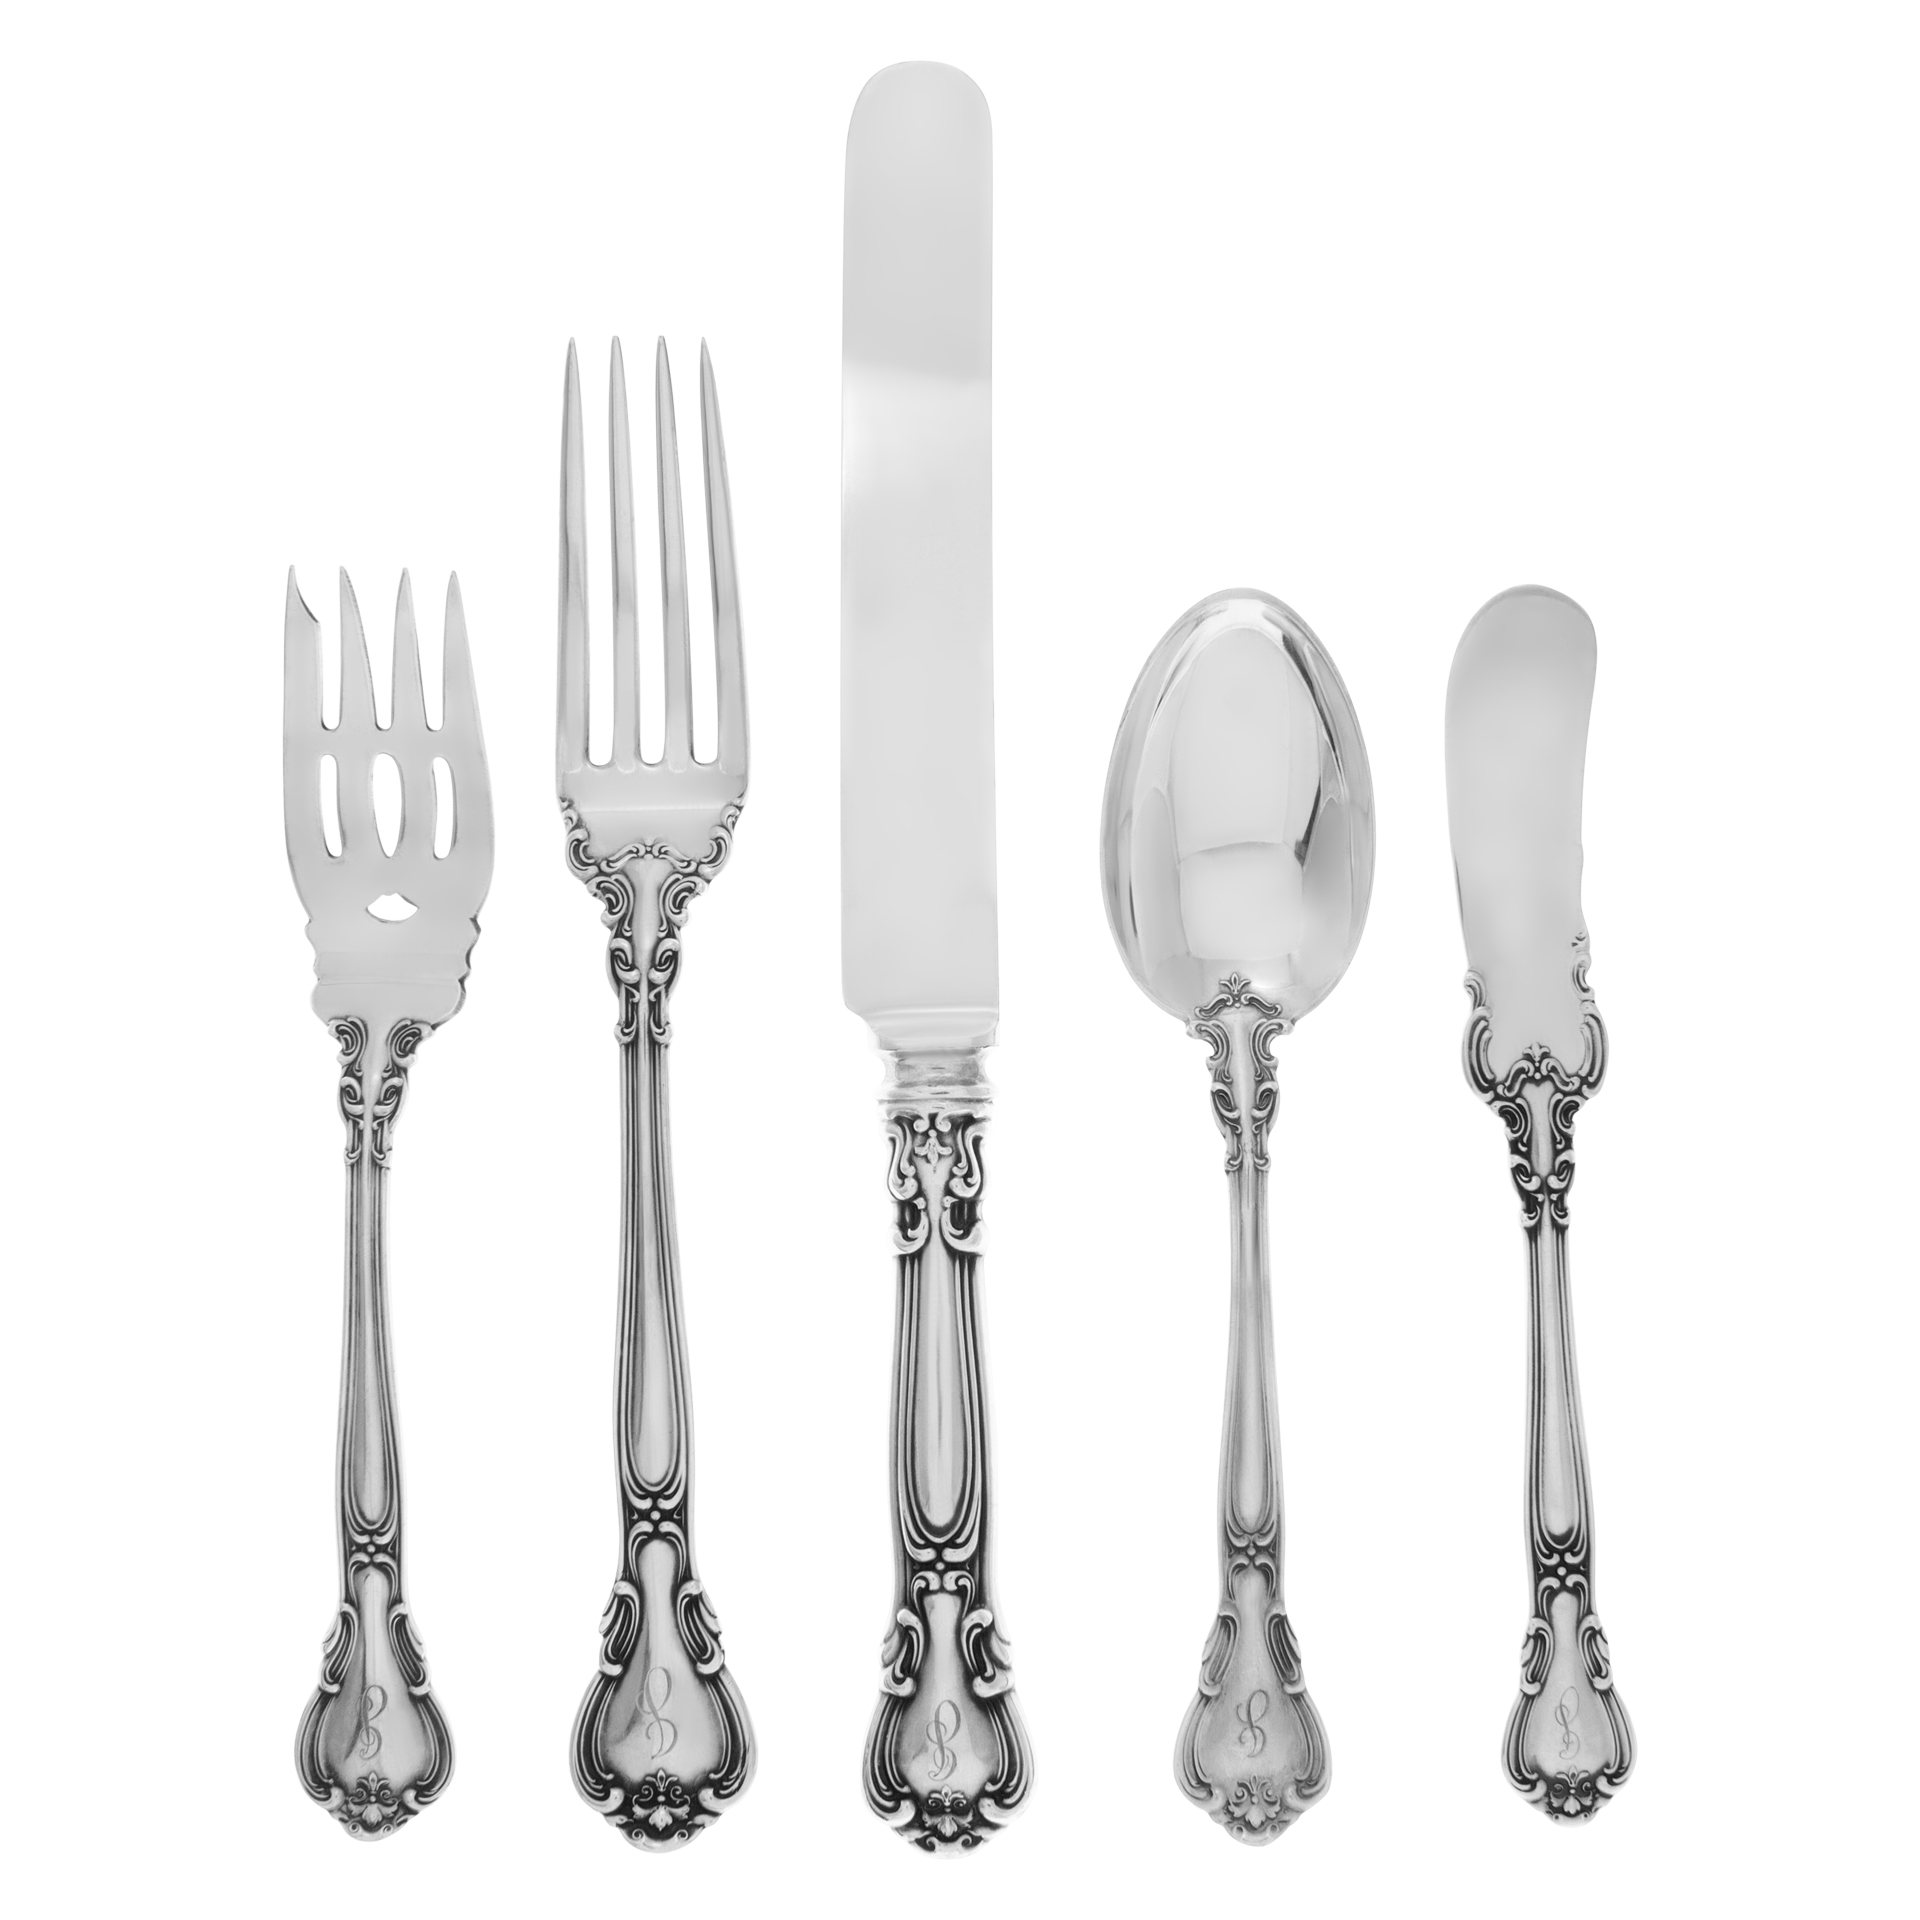 "CHANTILLY" antique sterling silver flatware patented 1895 by Gorham. 93 pieces total. image 1